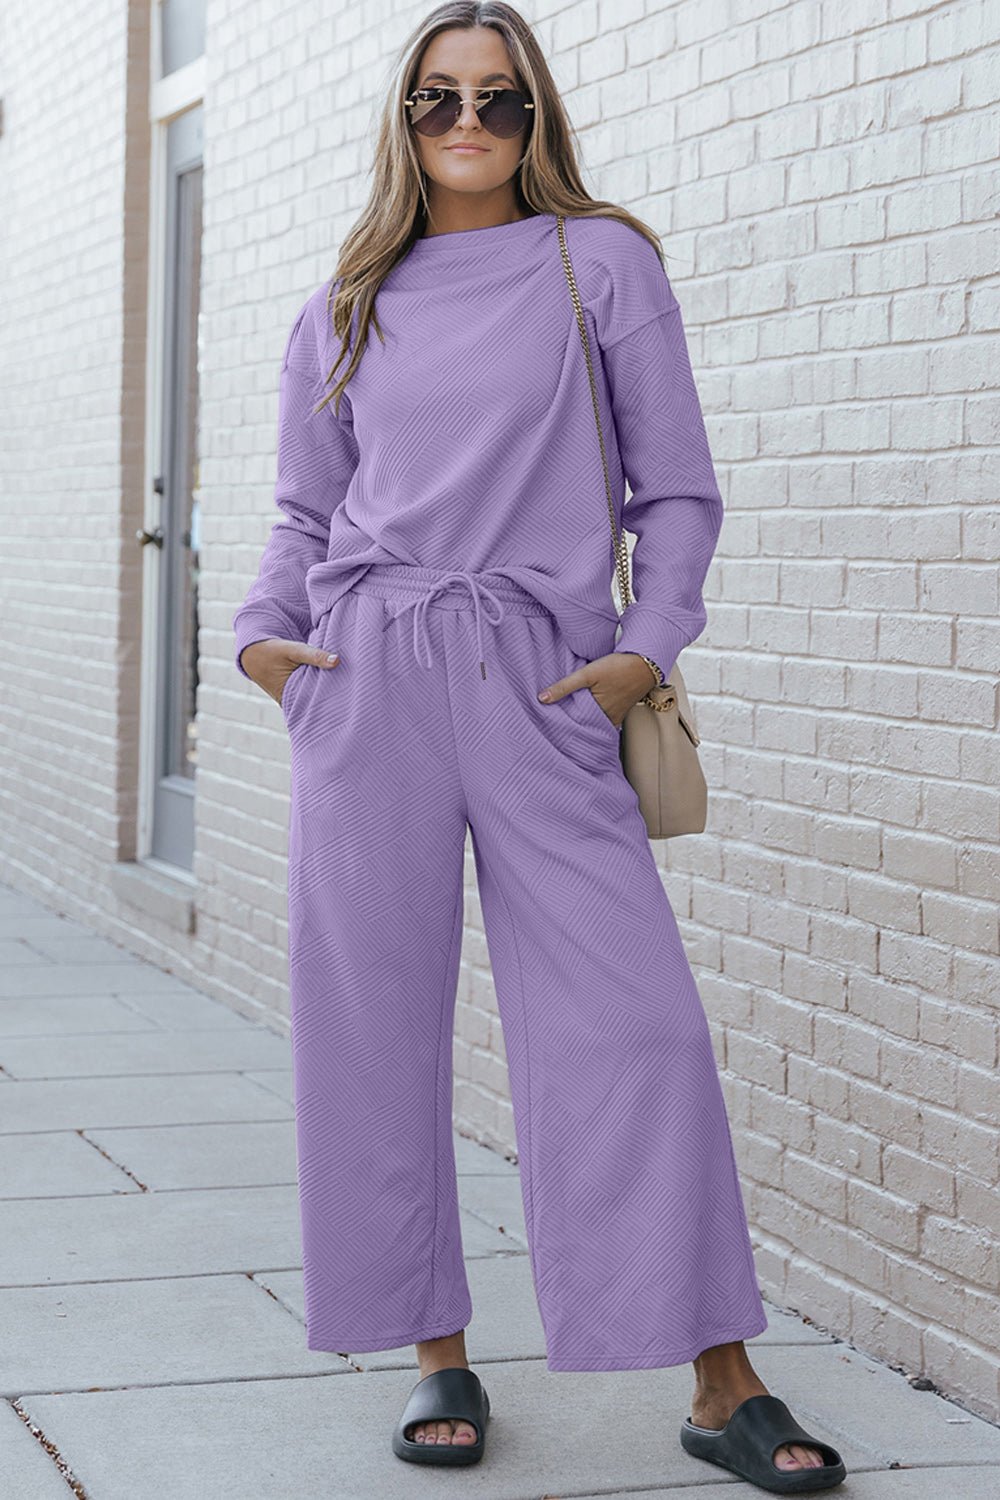 Textured Long Sleeve Top and Drawstring Pants Set Global Village Kailua Boutique